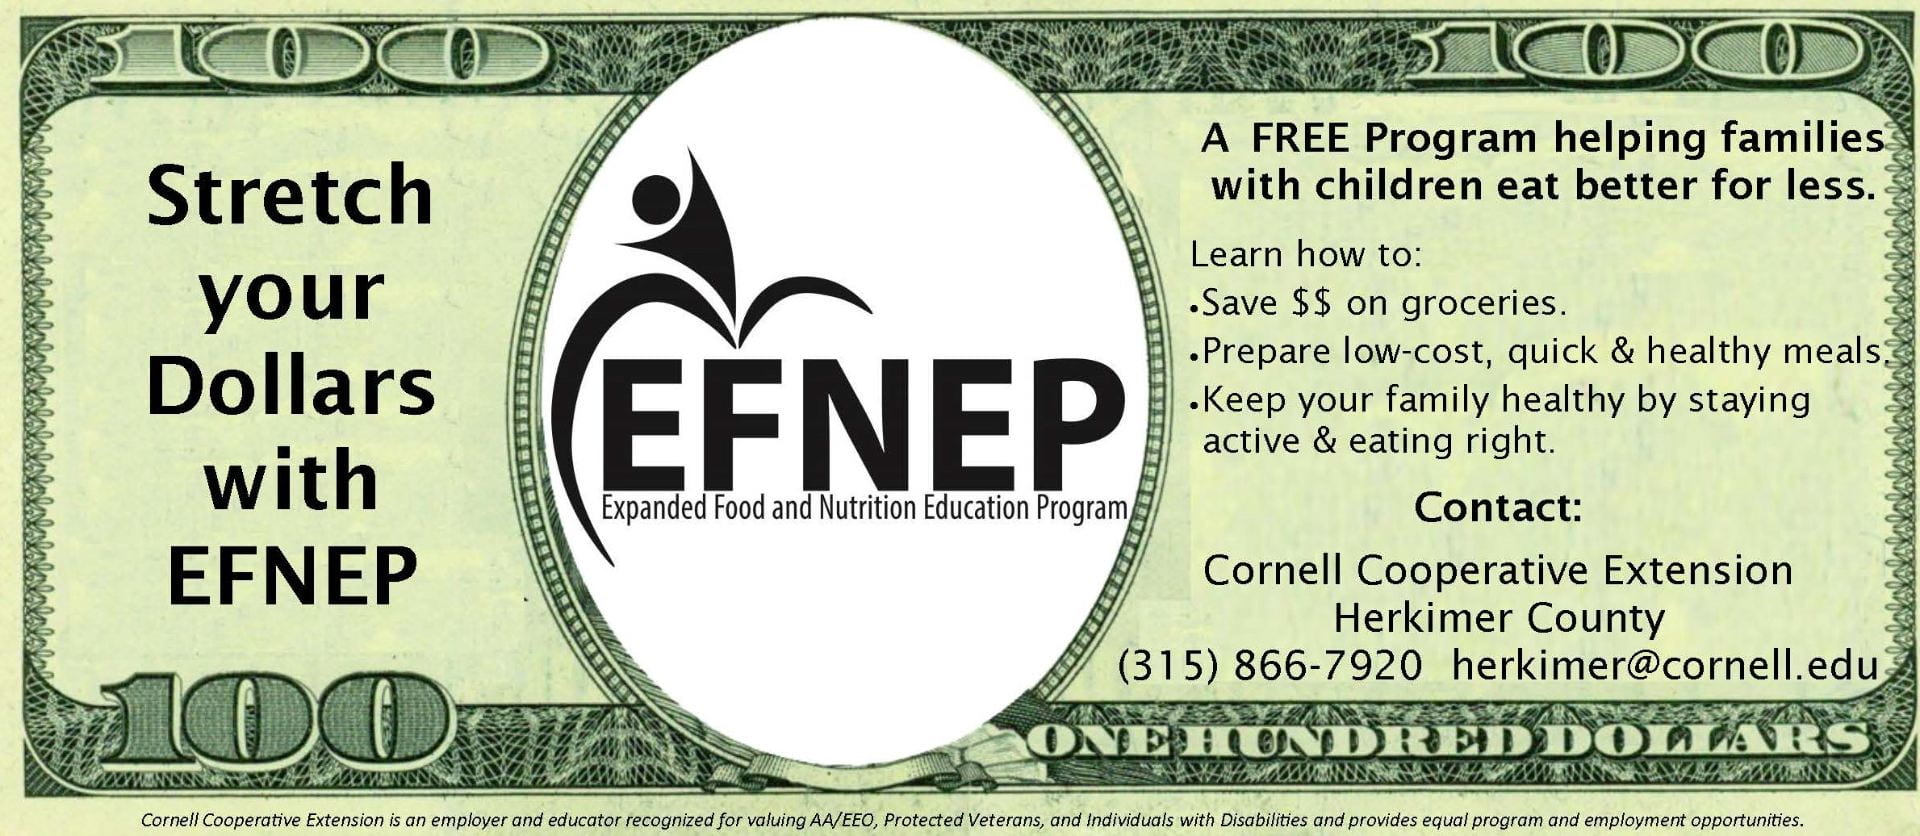 Stretch your dollars with EFNEP promo, made to look similar to a 100 dollar bill with the EFNEP logo in place of the face